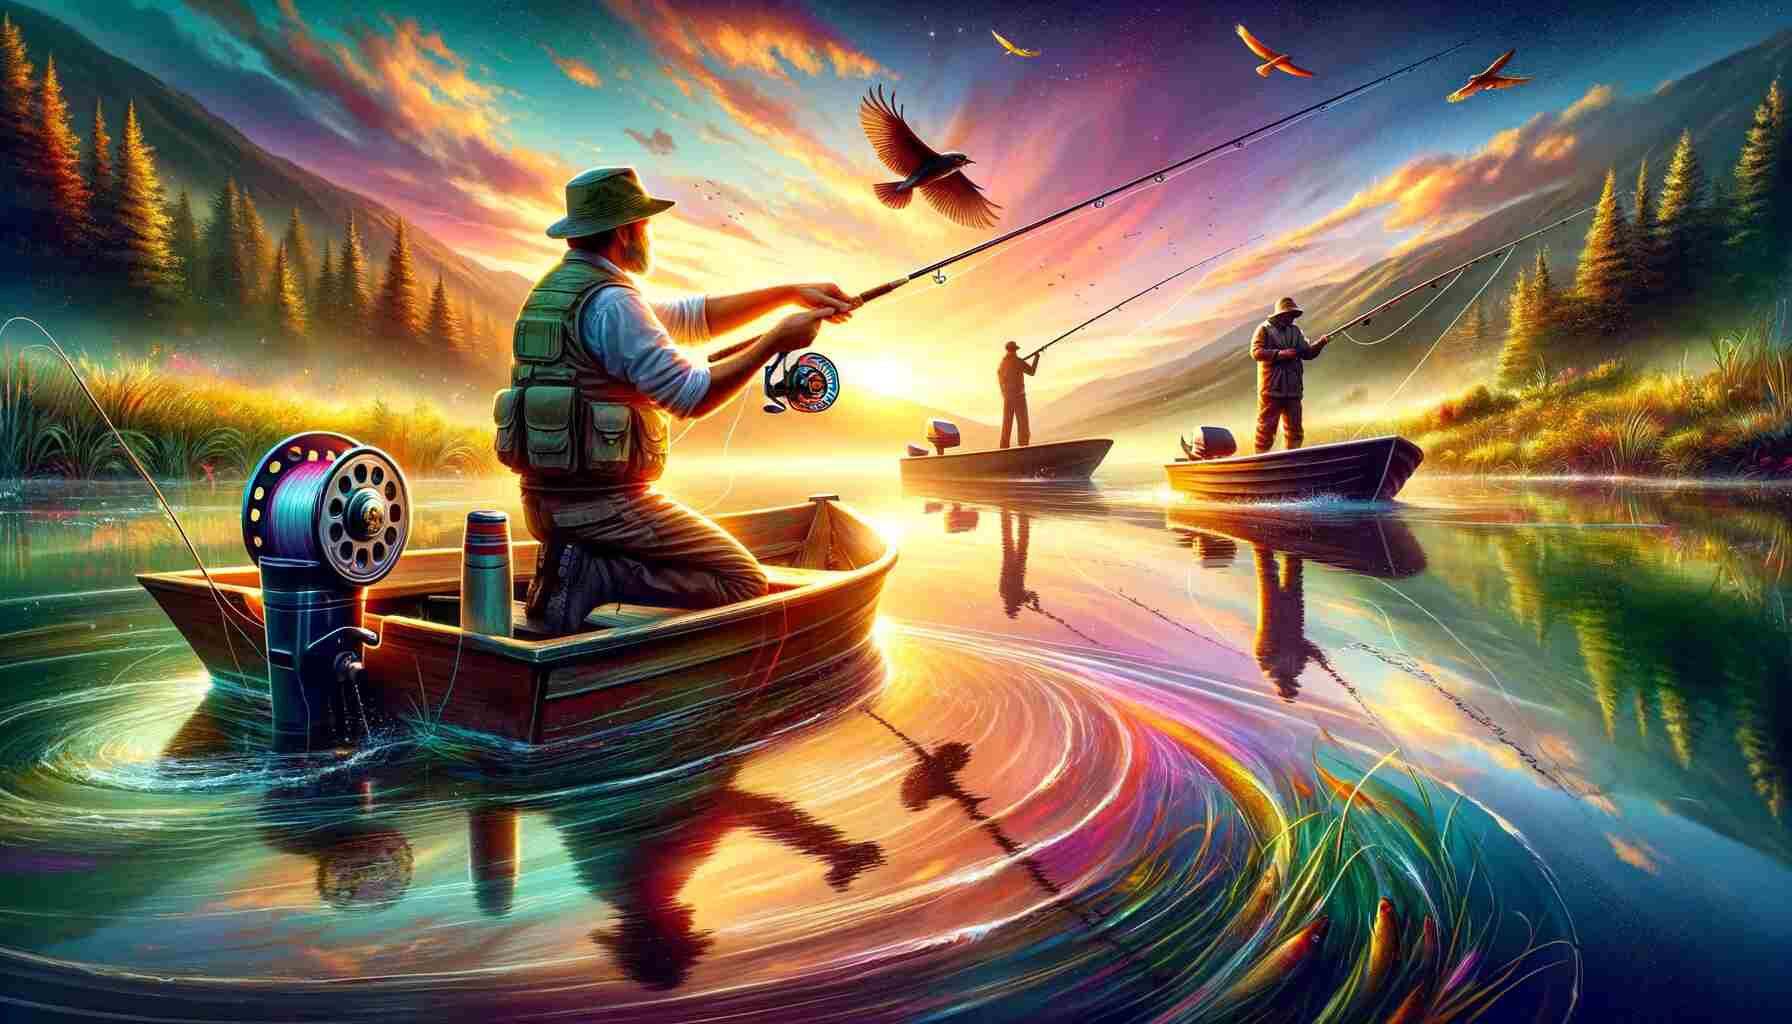 Serene sunrise over a lake with anglers engaged in various fishing techniques: fly fishing in the foreground, spinning fishing to the side, and baitcasting from a small boat in the background, reflecting the diverse appeal of fishing